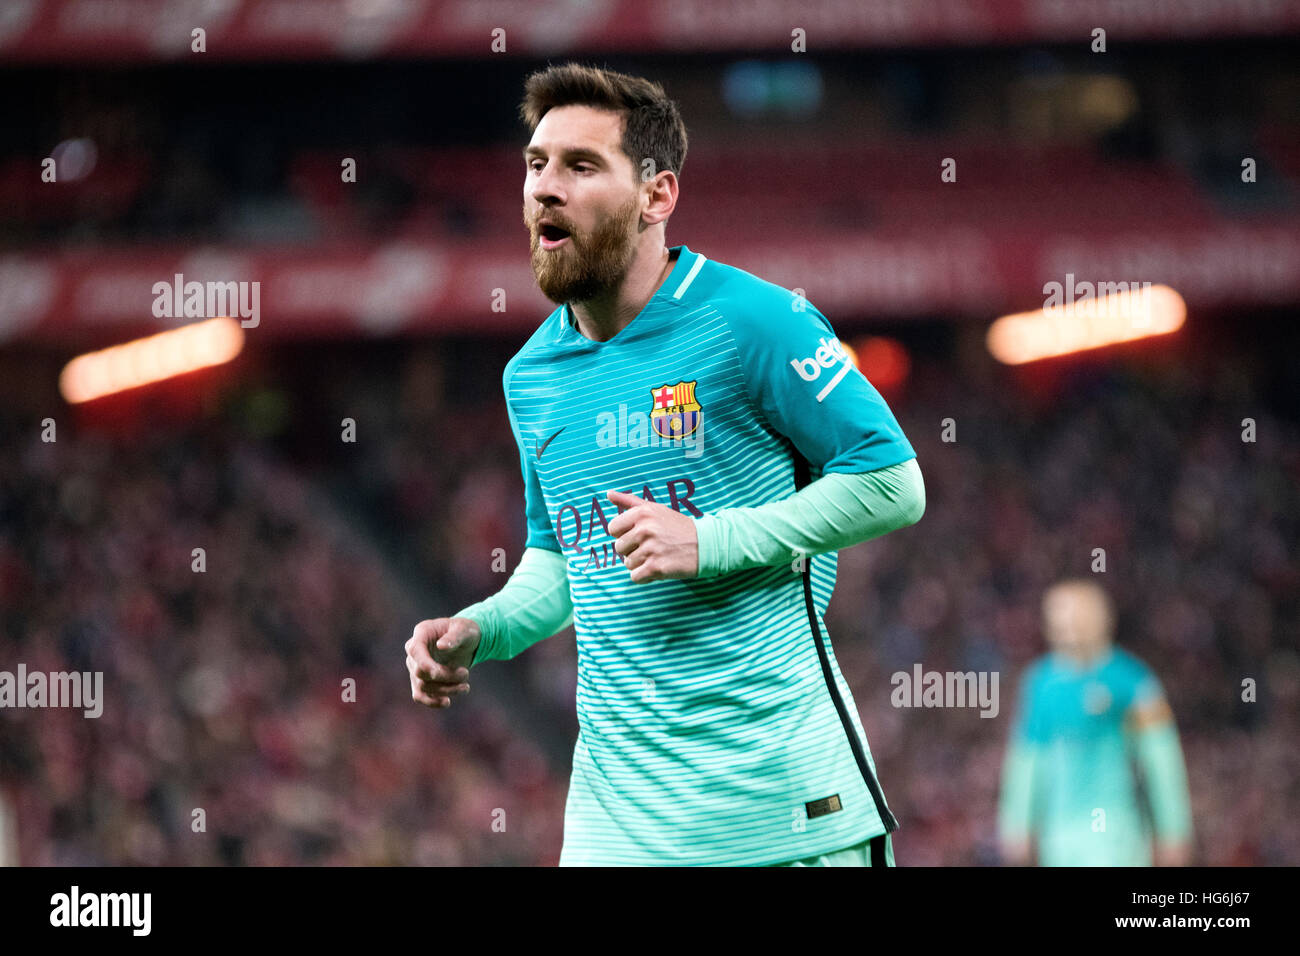 Lionel Messi Barcelona High Resolution Stock Photography and Images - Alamy